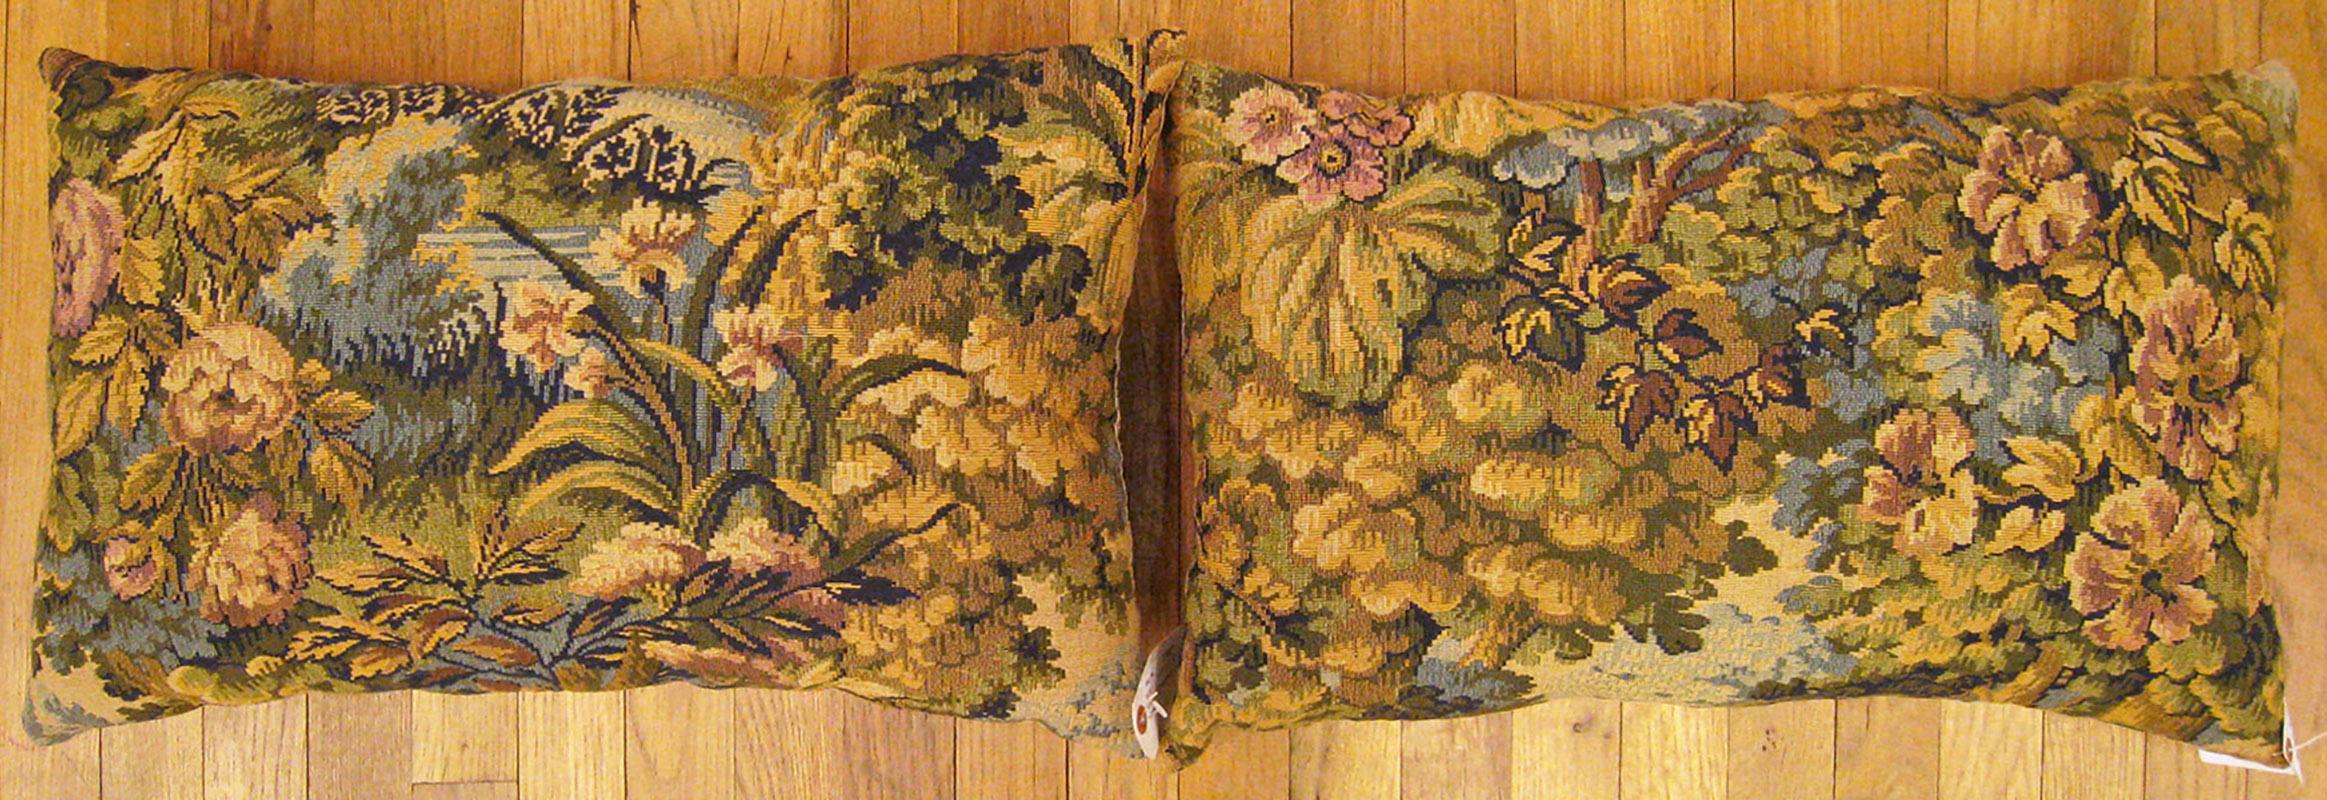 A pair of antique jacquard tapestry pillows ; size 1'3” x 2'0” each.

An antique decorative pillows with floral elements allover a soft blue central field, size 1'3